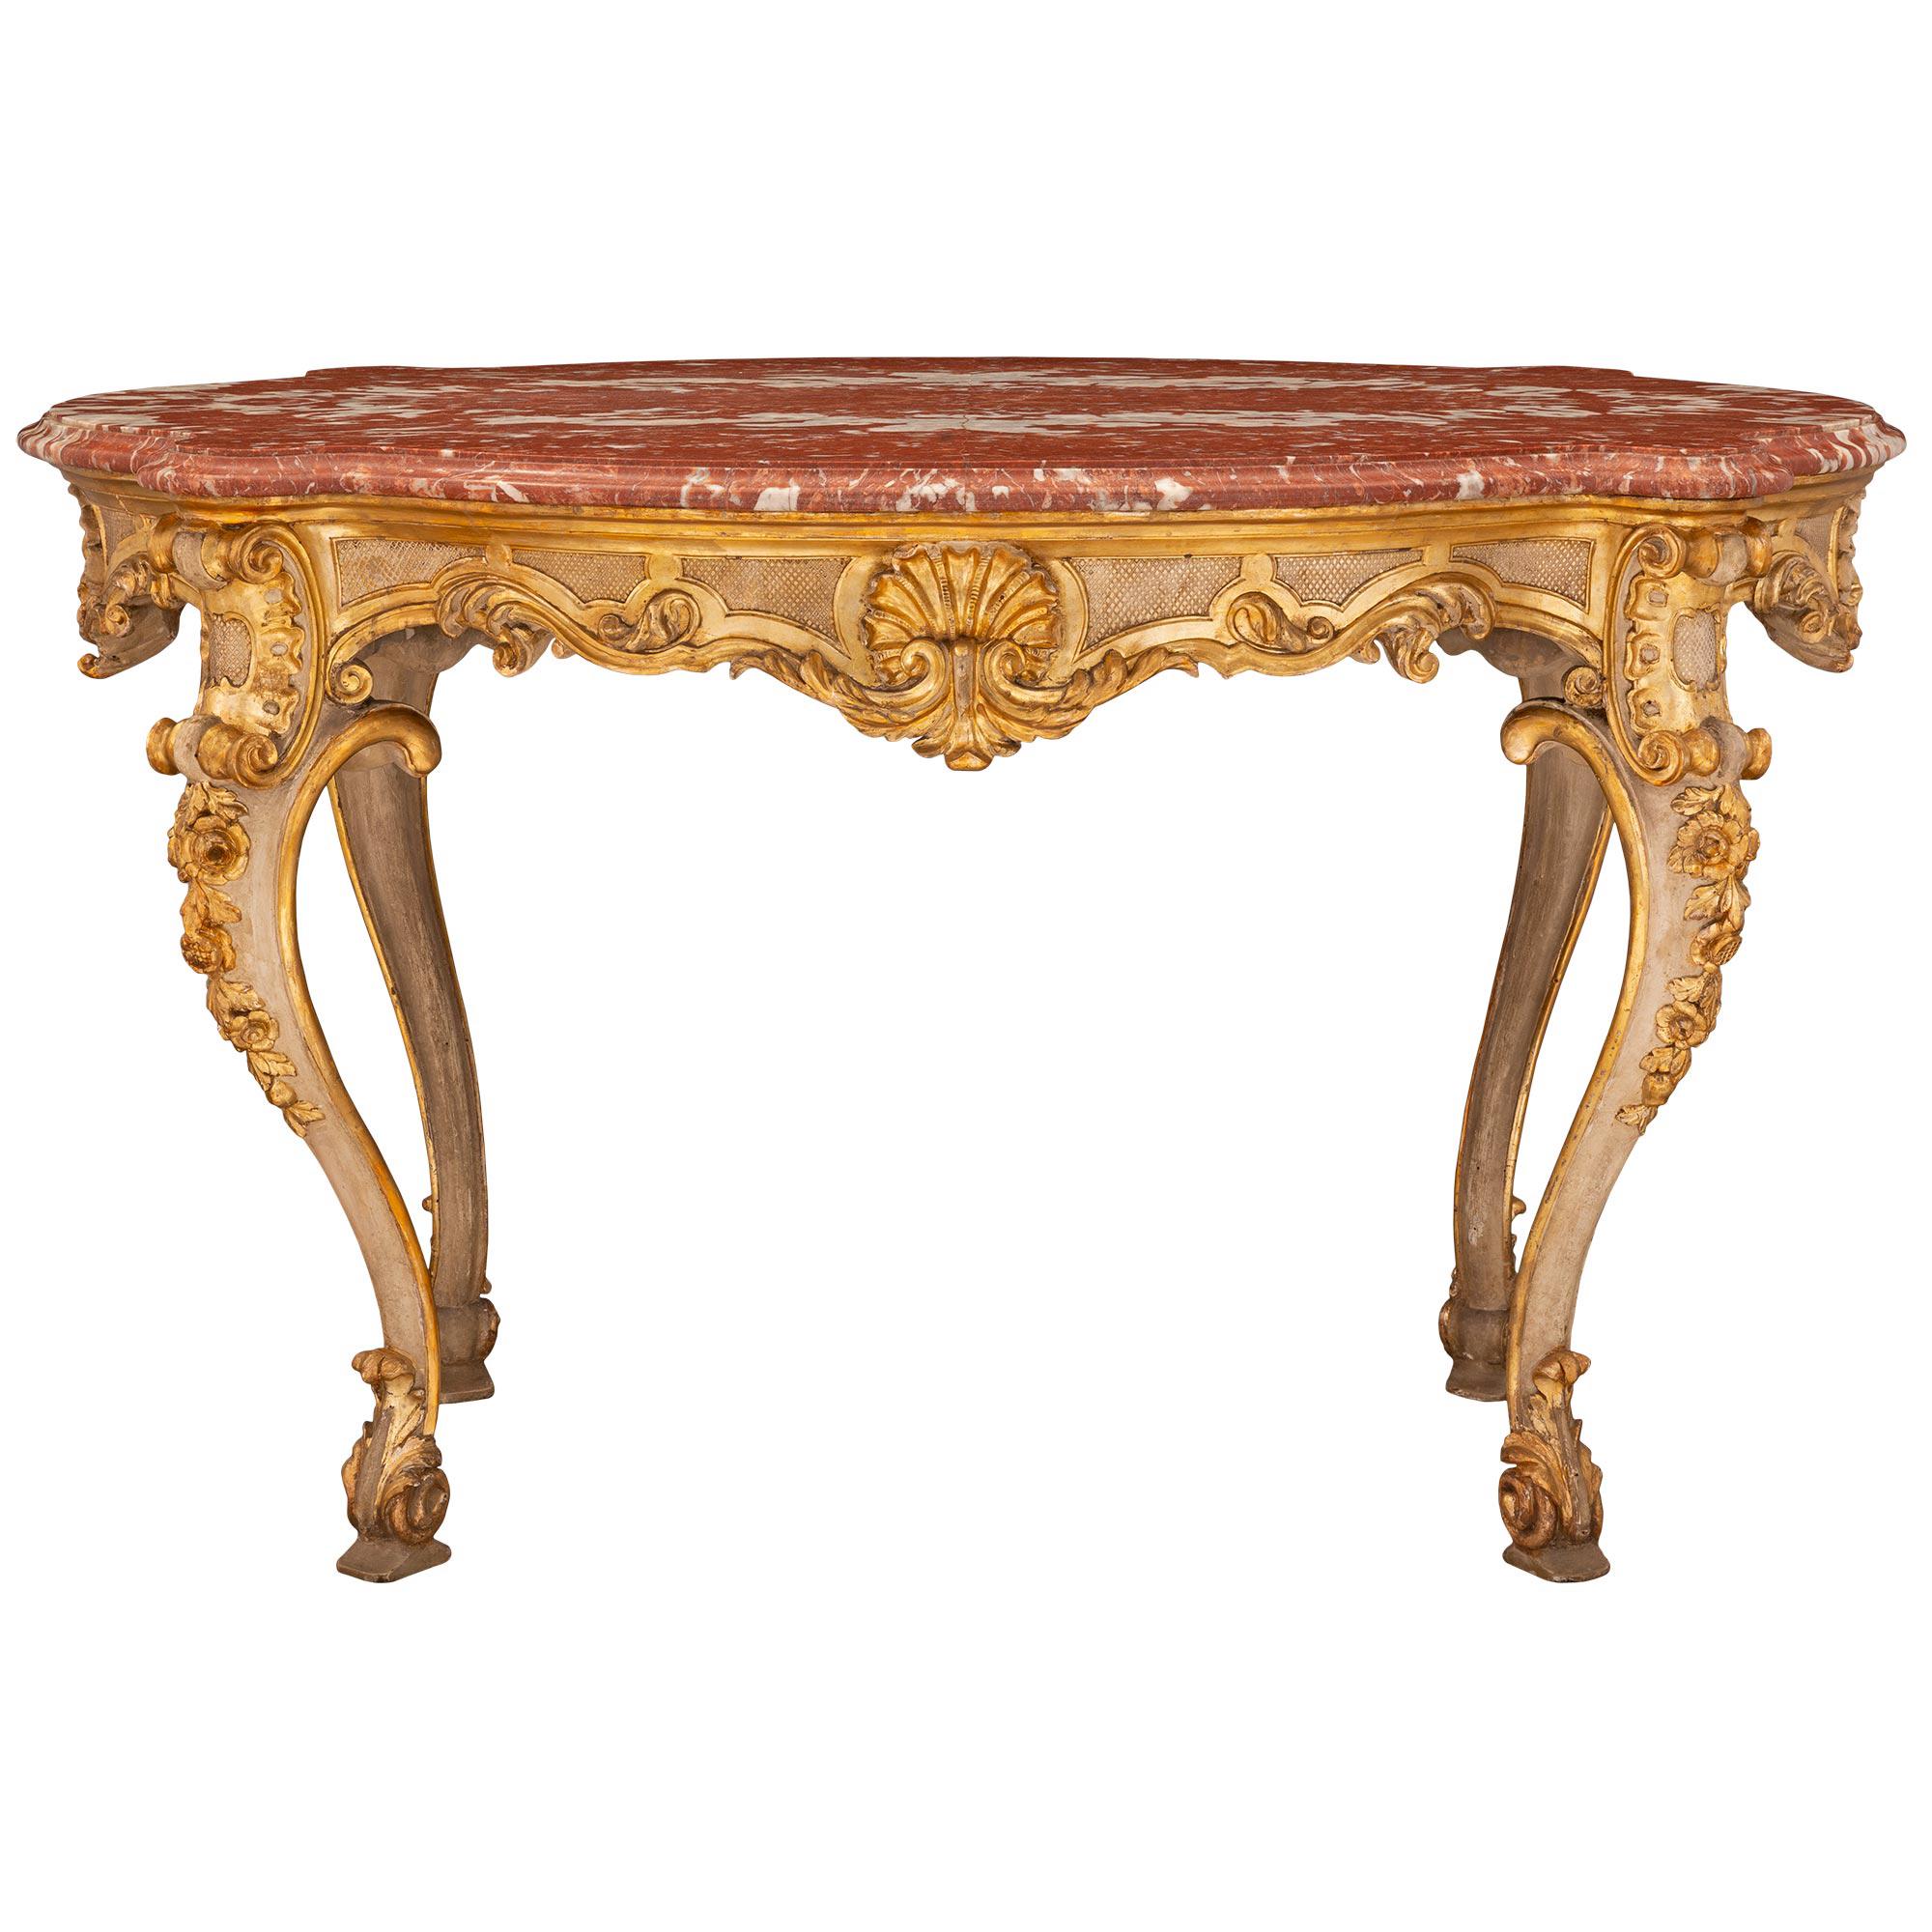 Italian Early 19th Century Mecca, Patinated, and Veneered Marble Center Table For Sale